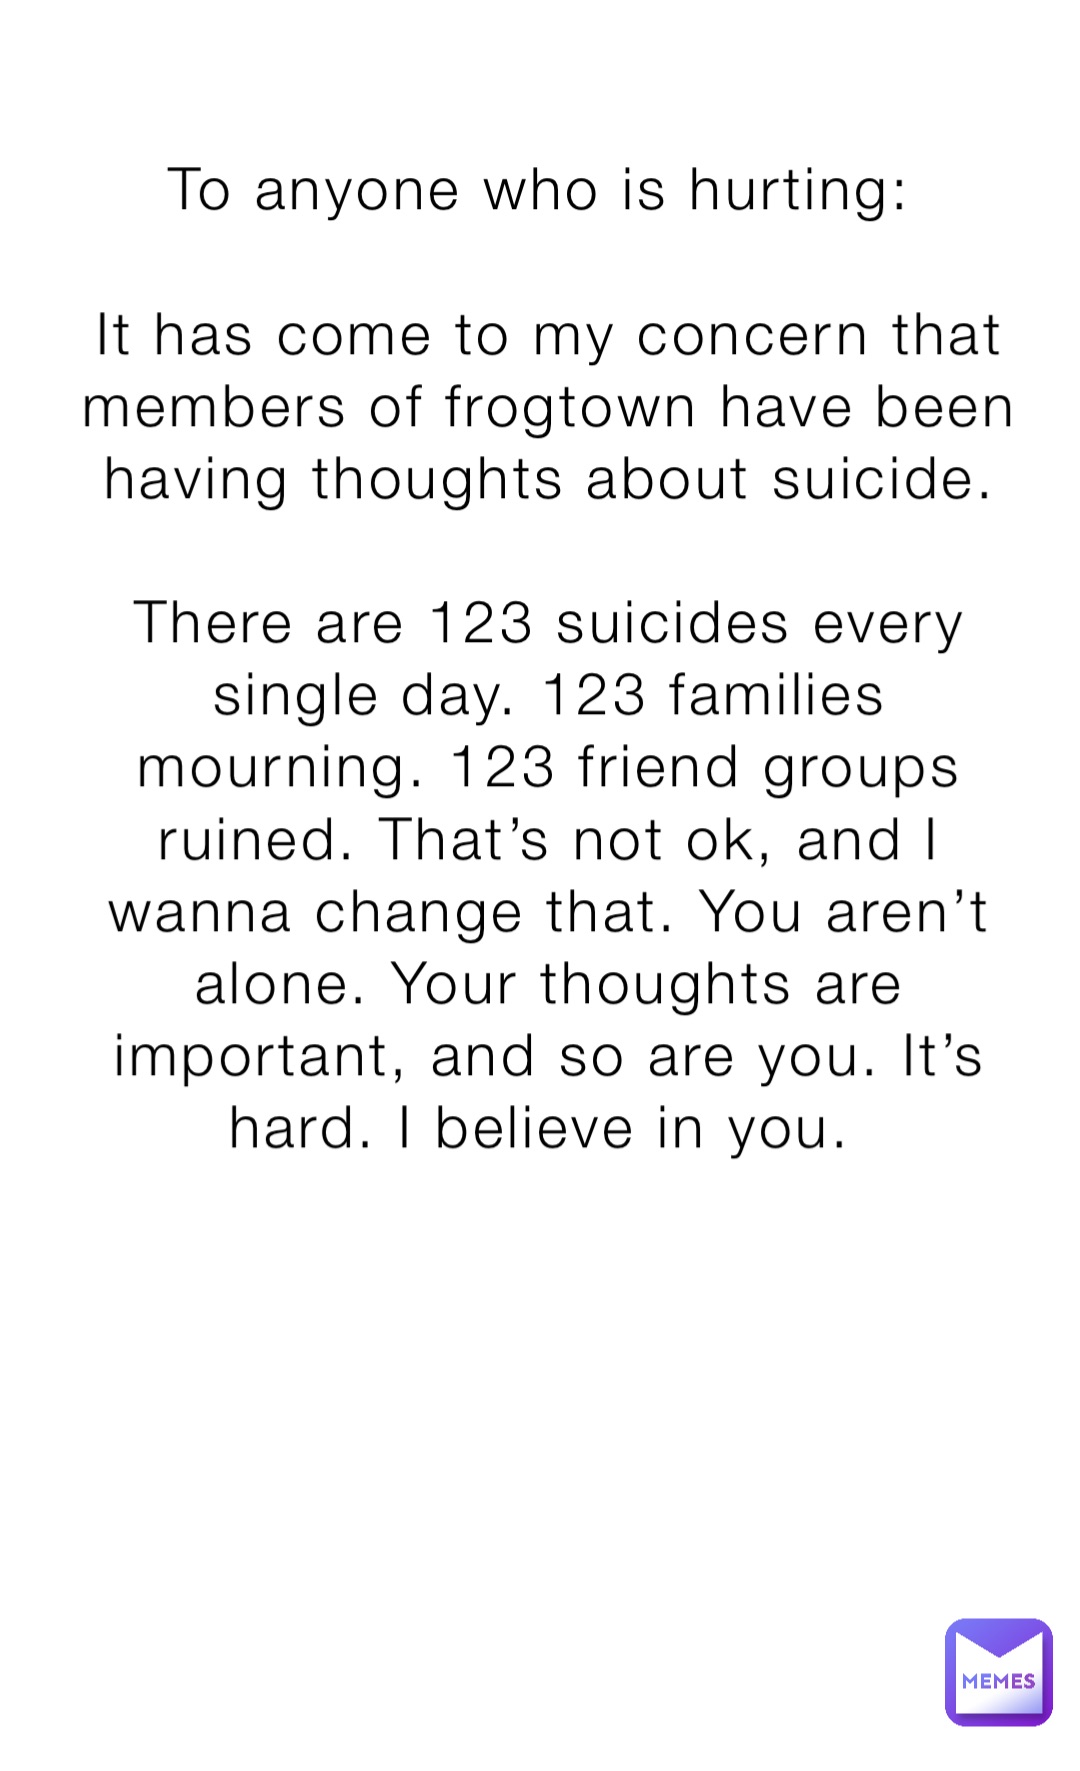 To anyone who is hurting:

It has come to my concern that members of frogtown have been having thoughts about suicide. 

There are 123 suicides every single day. 123 families mourning. 123 friend groups ruined. That’s not ok, and I wanna change that. You aren’t alone. Your thoughts are important, and so are you. It’s hard. I believe in you.